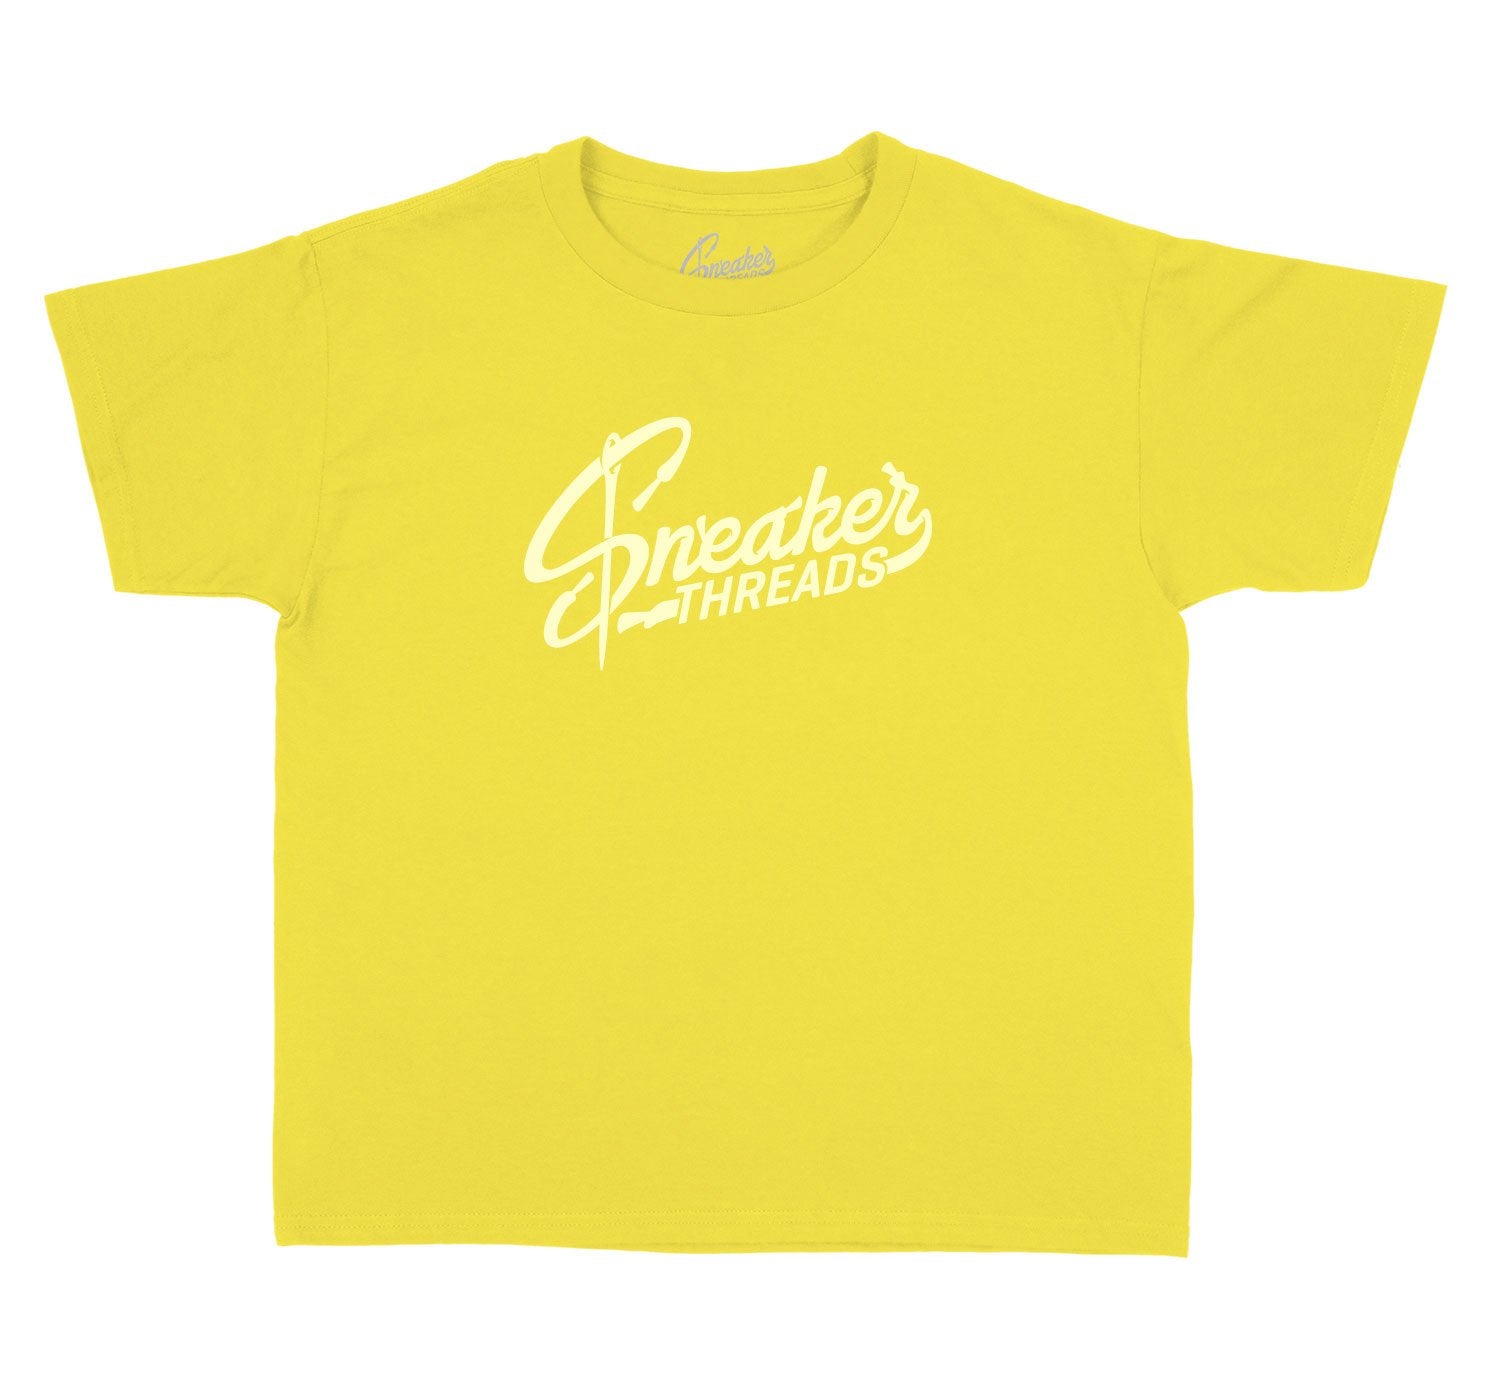 kids tee Collection matches perfect with the Jordan 6 citron tint